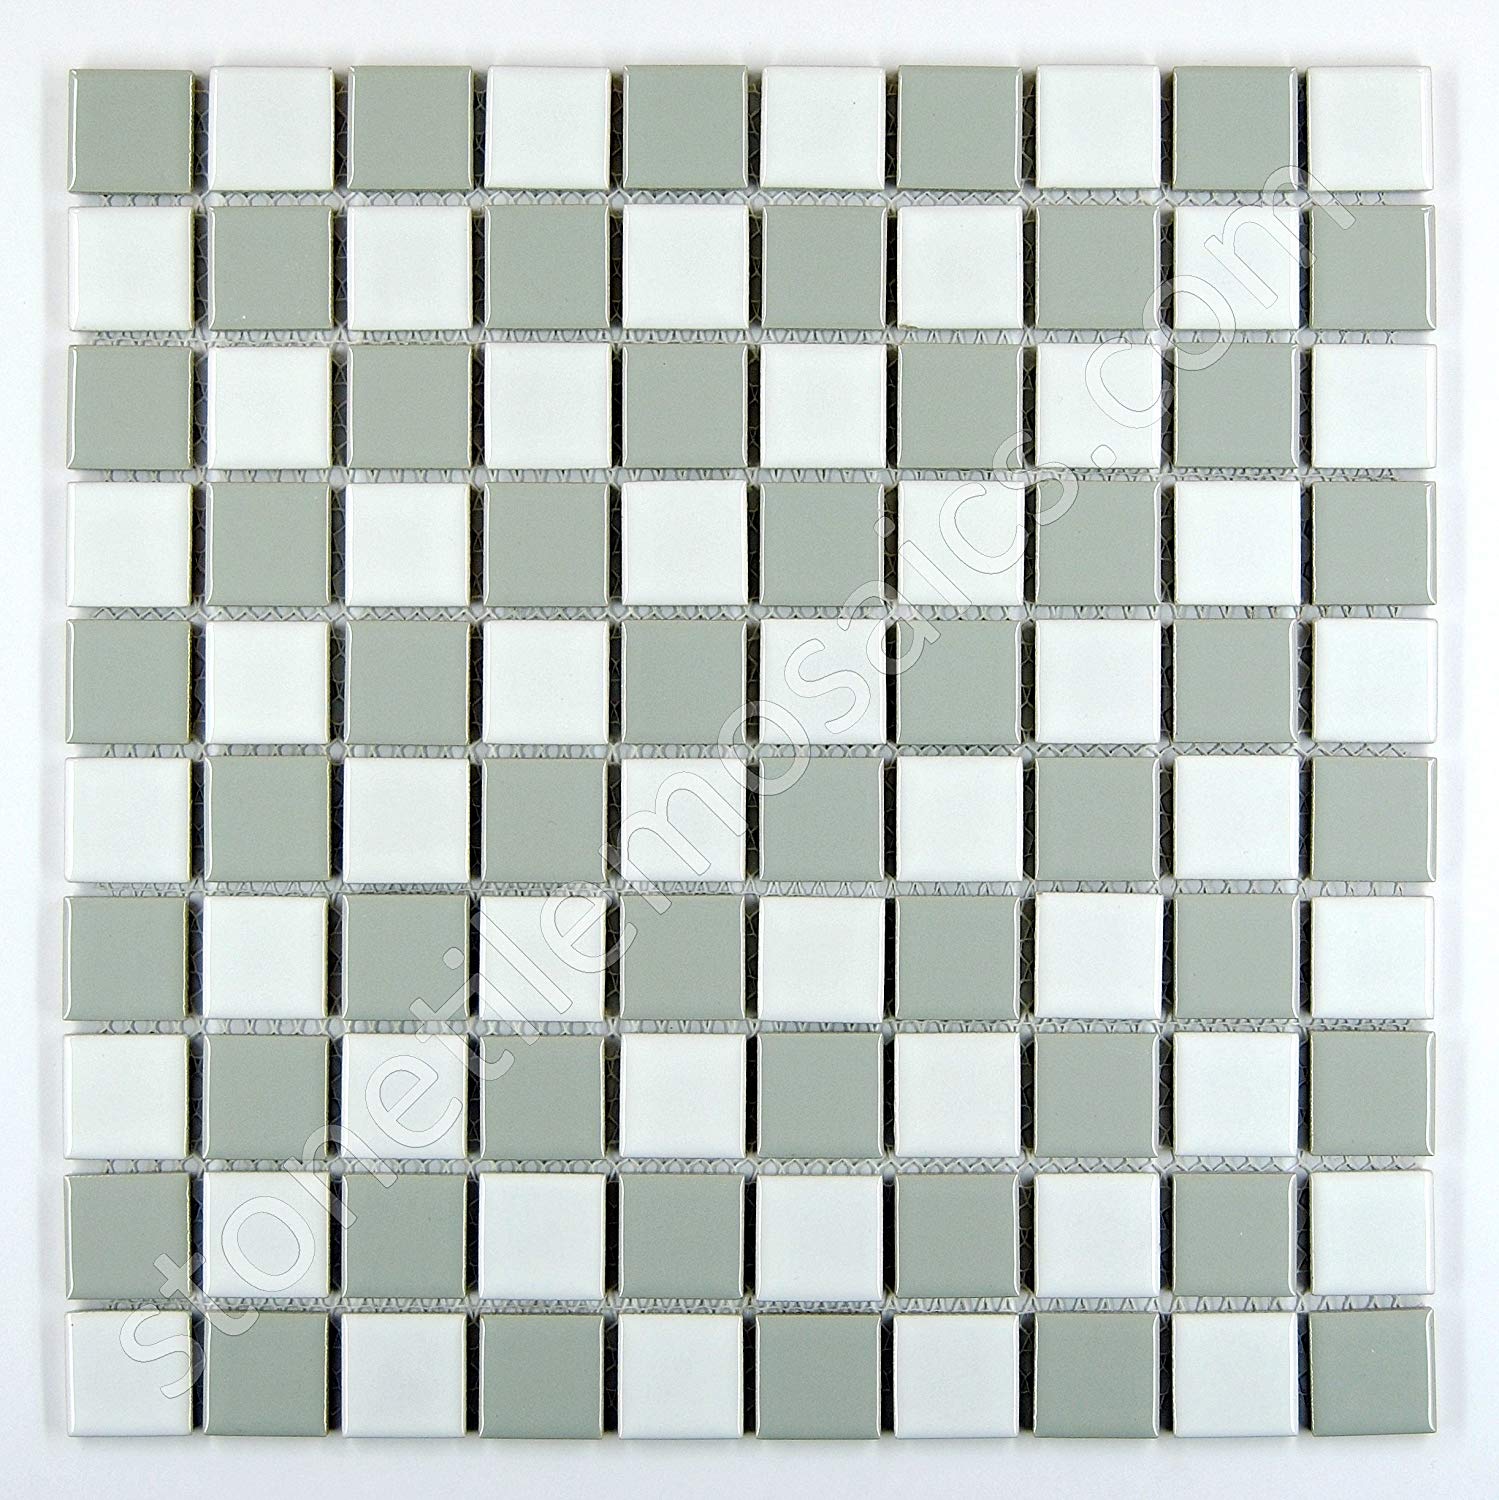 Square Checkered Tile Grey and White Porcelain Mosaic Wall Floor Tile Shiny Look 1-1/8" X 1-1/8"